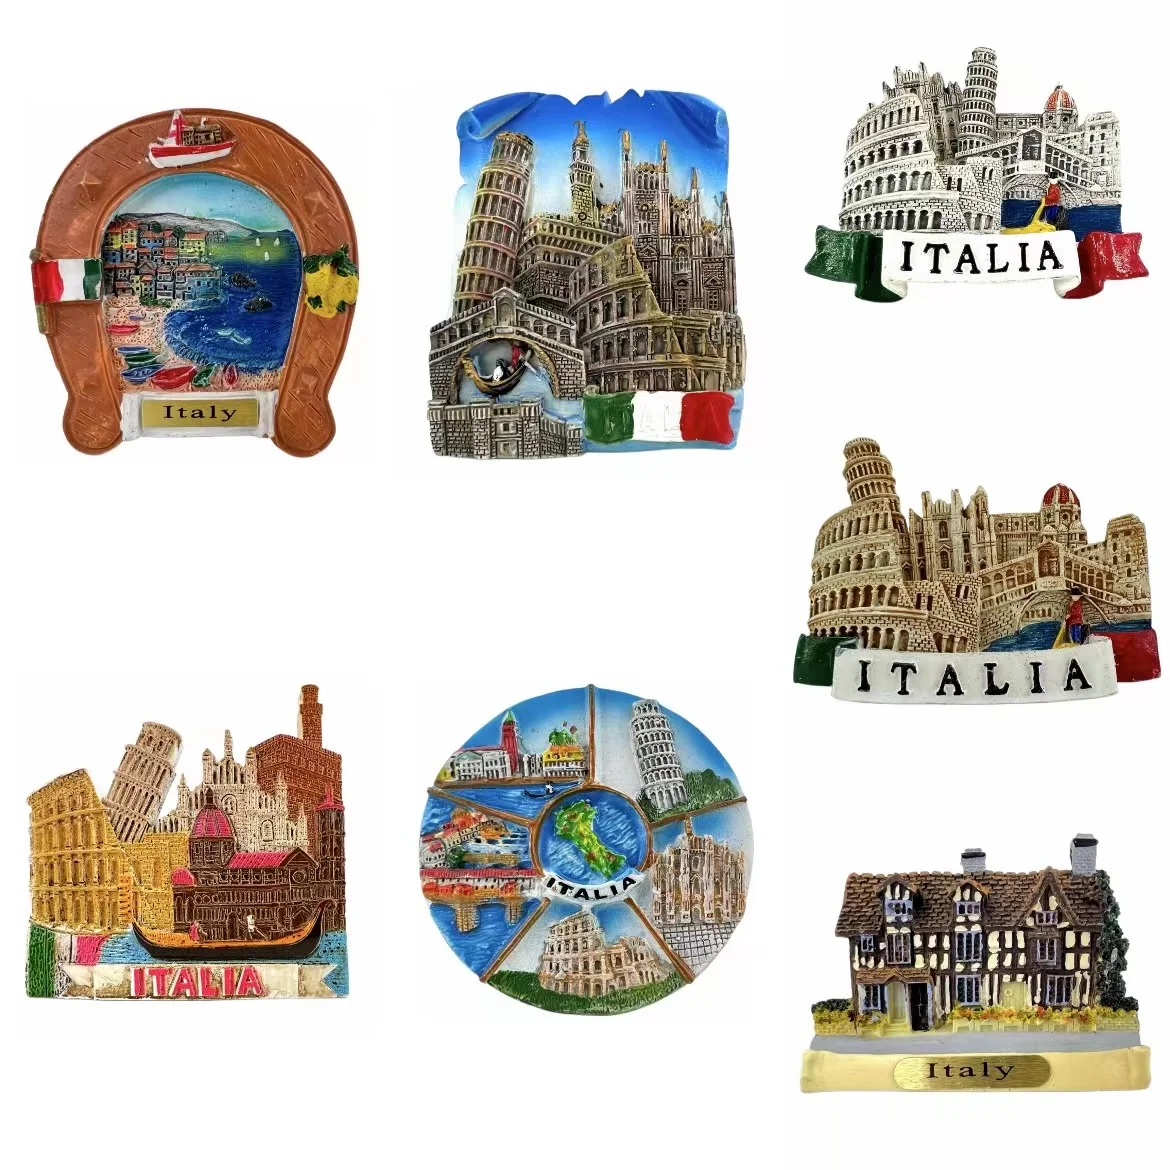 

Rome Leaning Tower of Pisa Vatican City Colosseum Italy Fridge Magnets Horseshoe Travel 3D Memorial Magnetic Refrigerator